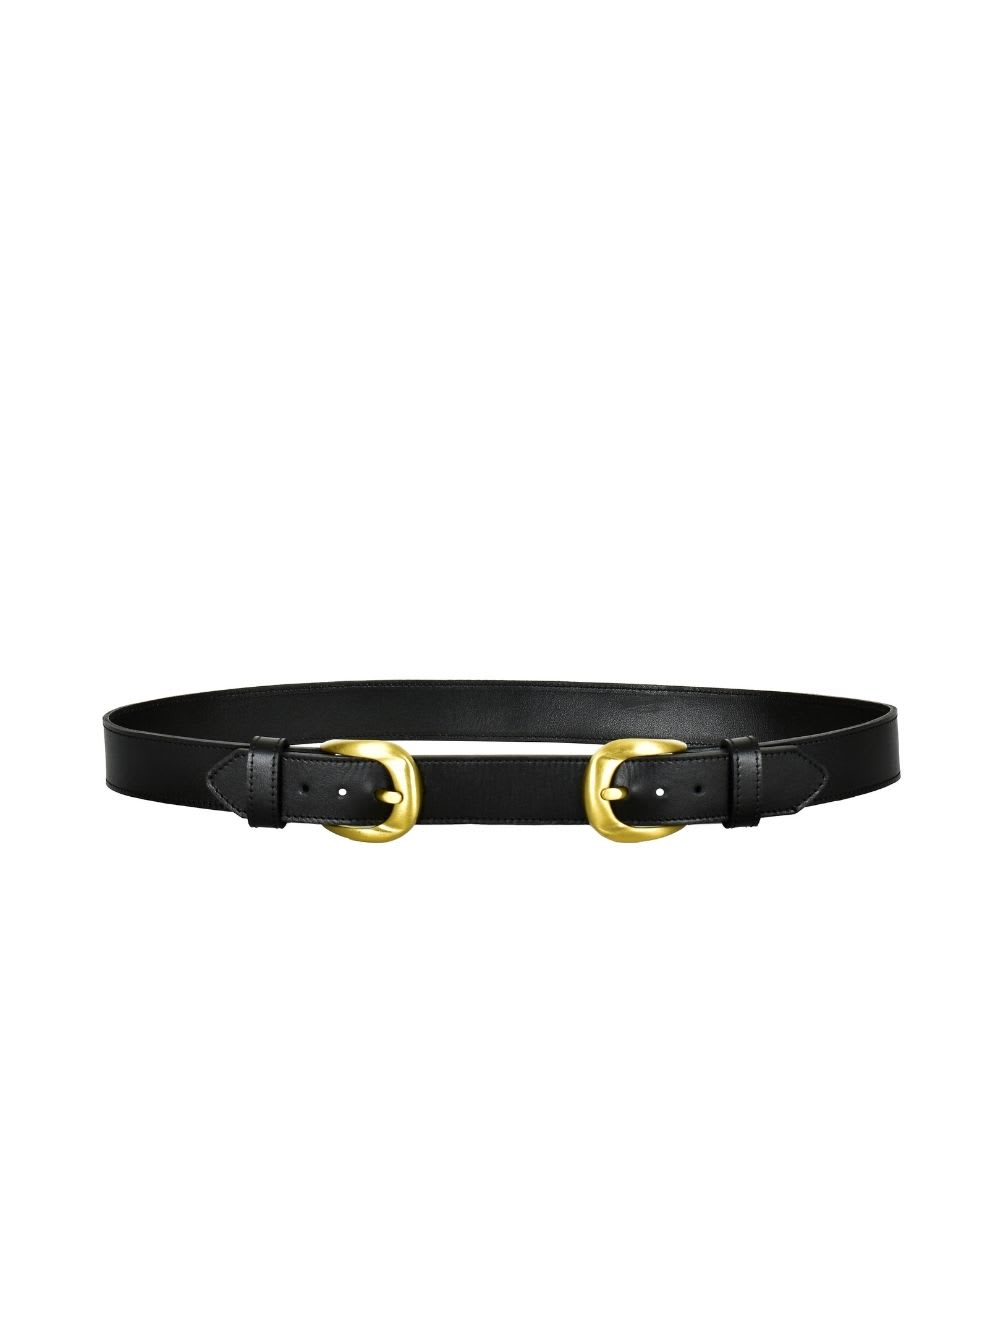 Federica Tosi Black Leather Belt With Metal Buckles